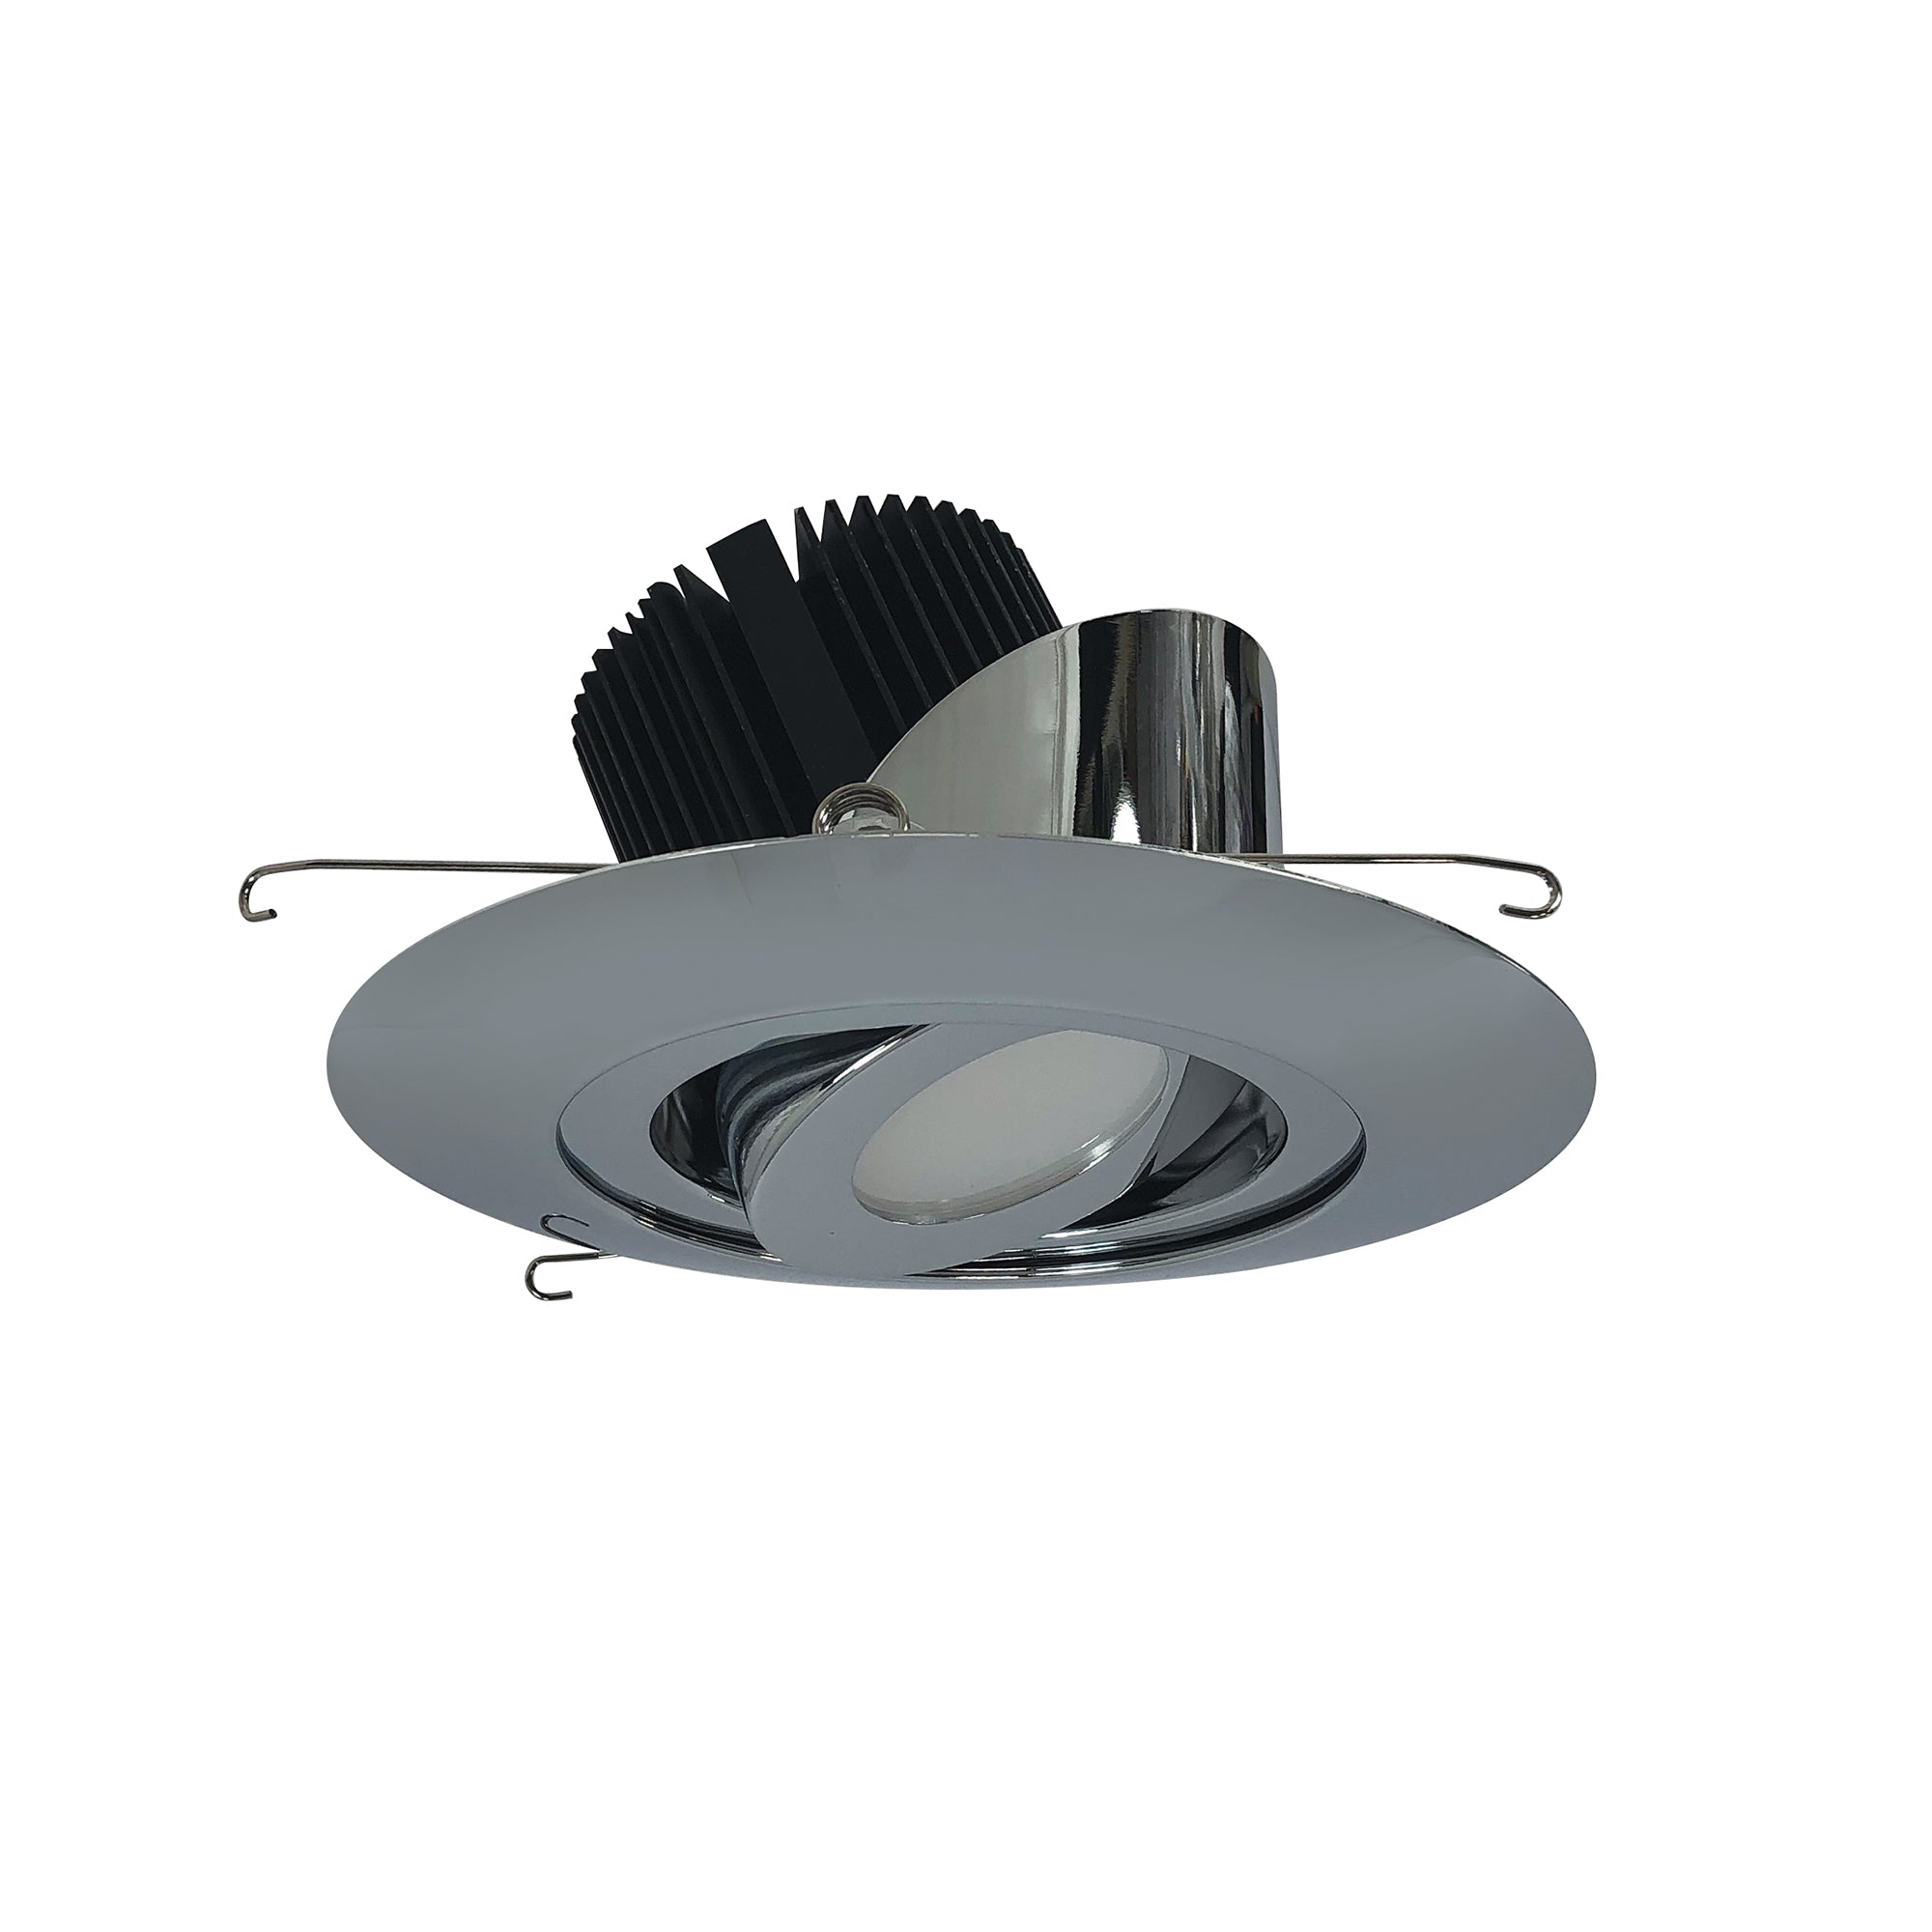 Nora Lighting NRM2-614L2535MC - Recessed - 6 Inch Marquise II Round Surface Adjustable Trim, Medium Flood, 2500lm, 3500K, Chrome (Not Compatible with NHRM2-625 Housings)